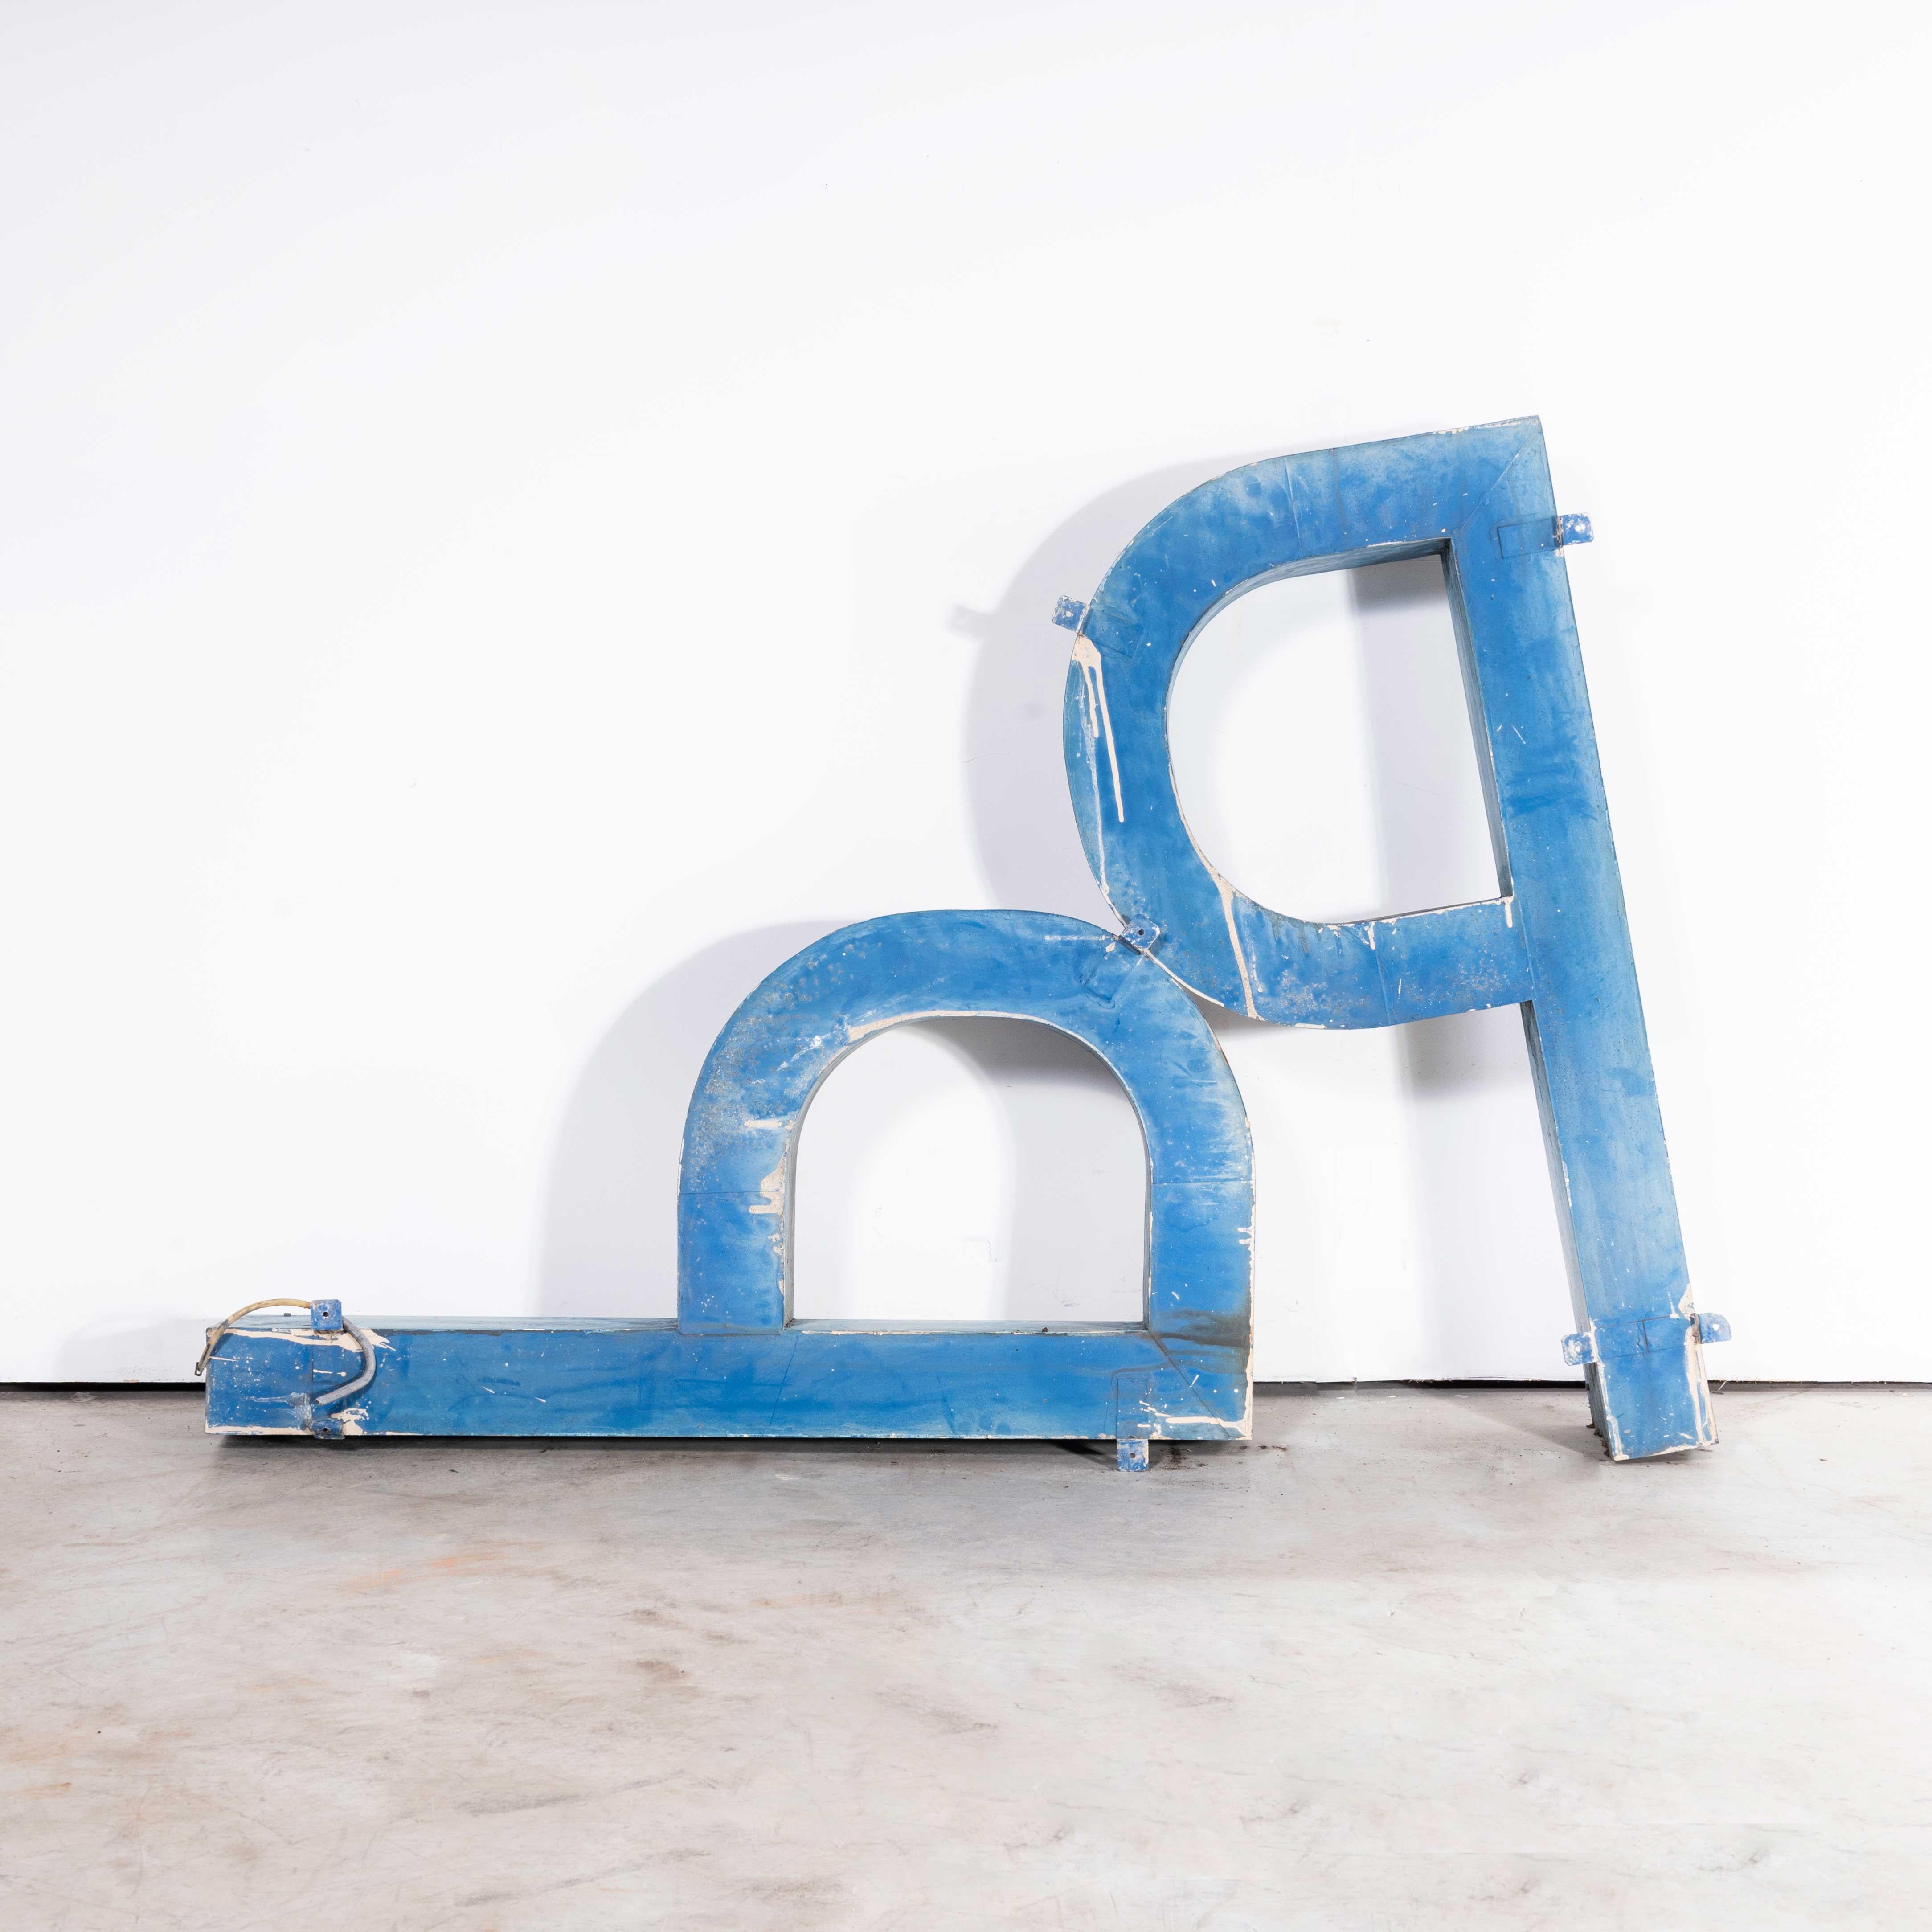 Czech 1950's Very Large Original Sign Letter P - One Meter High. For Sale